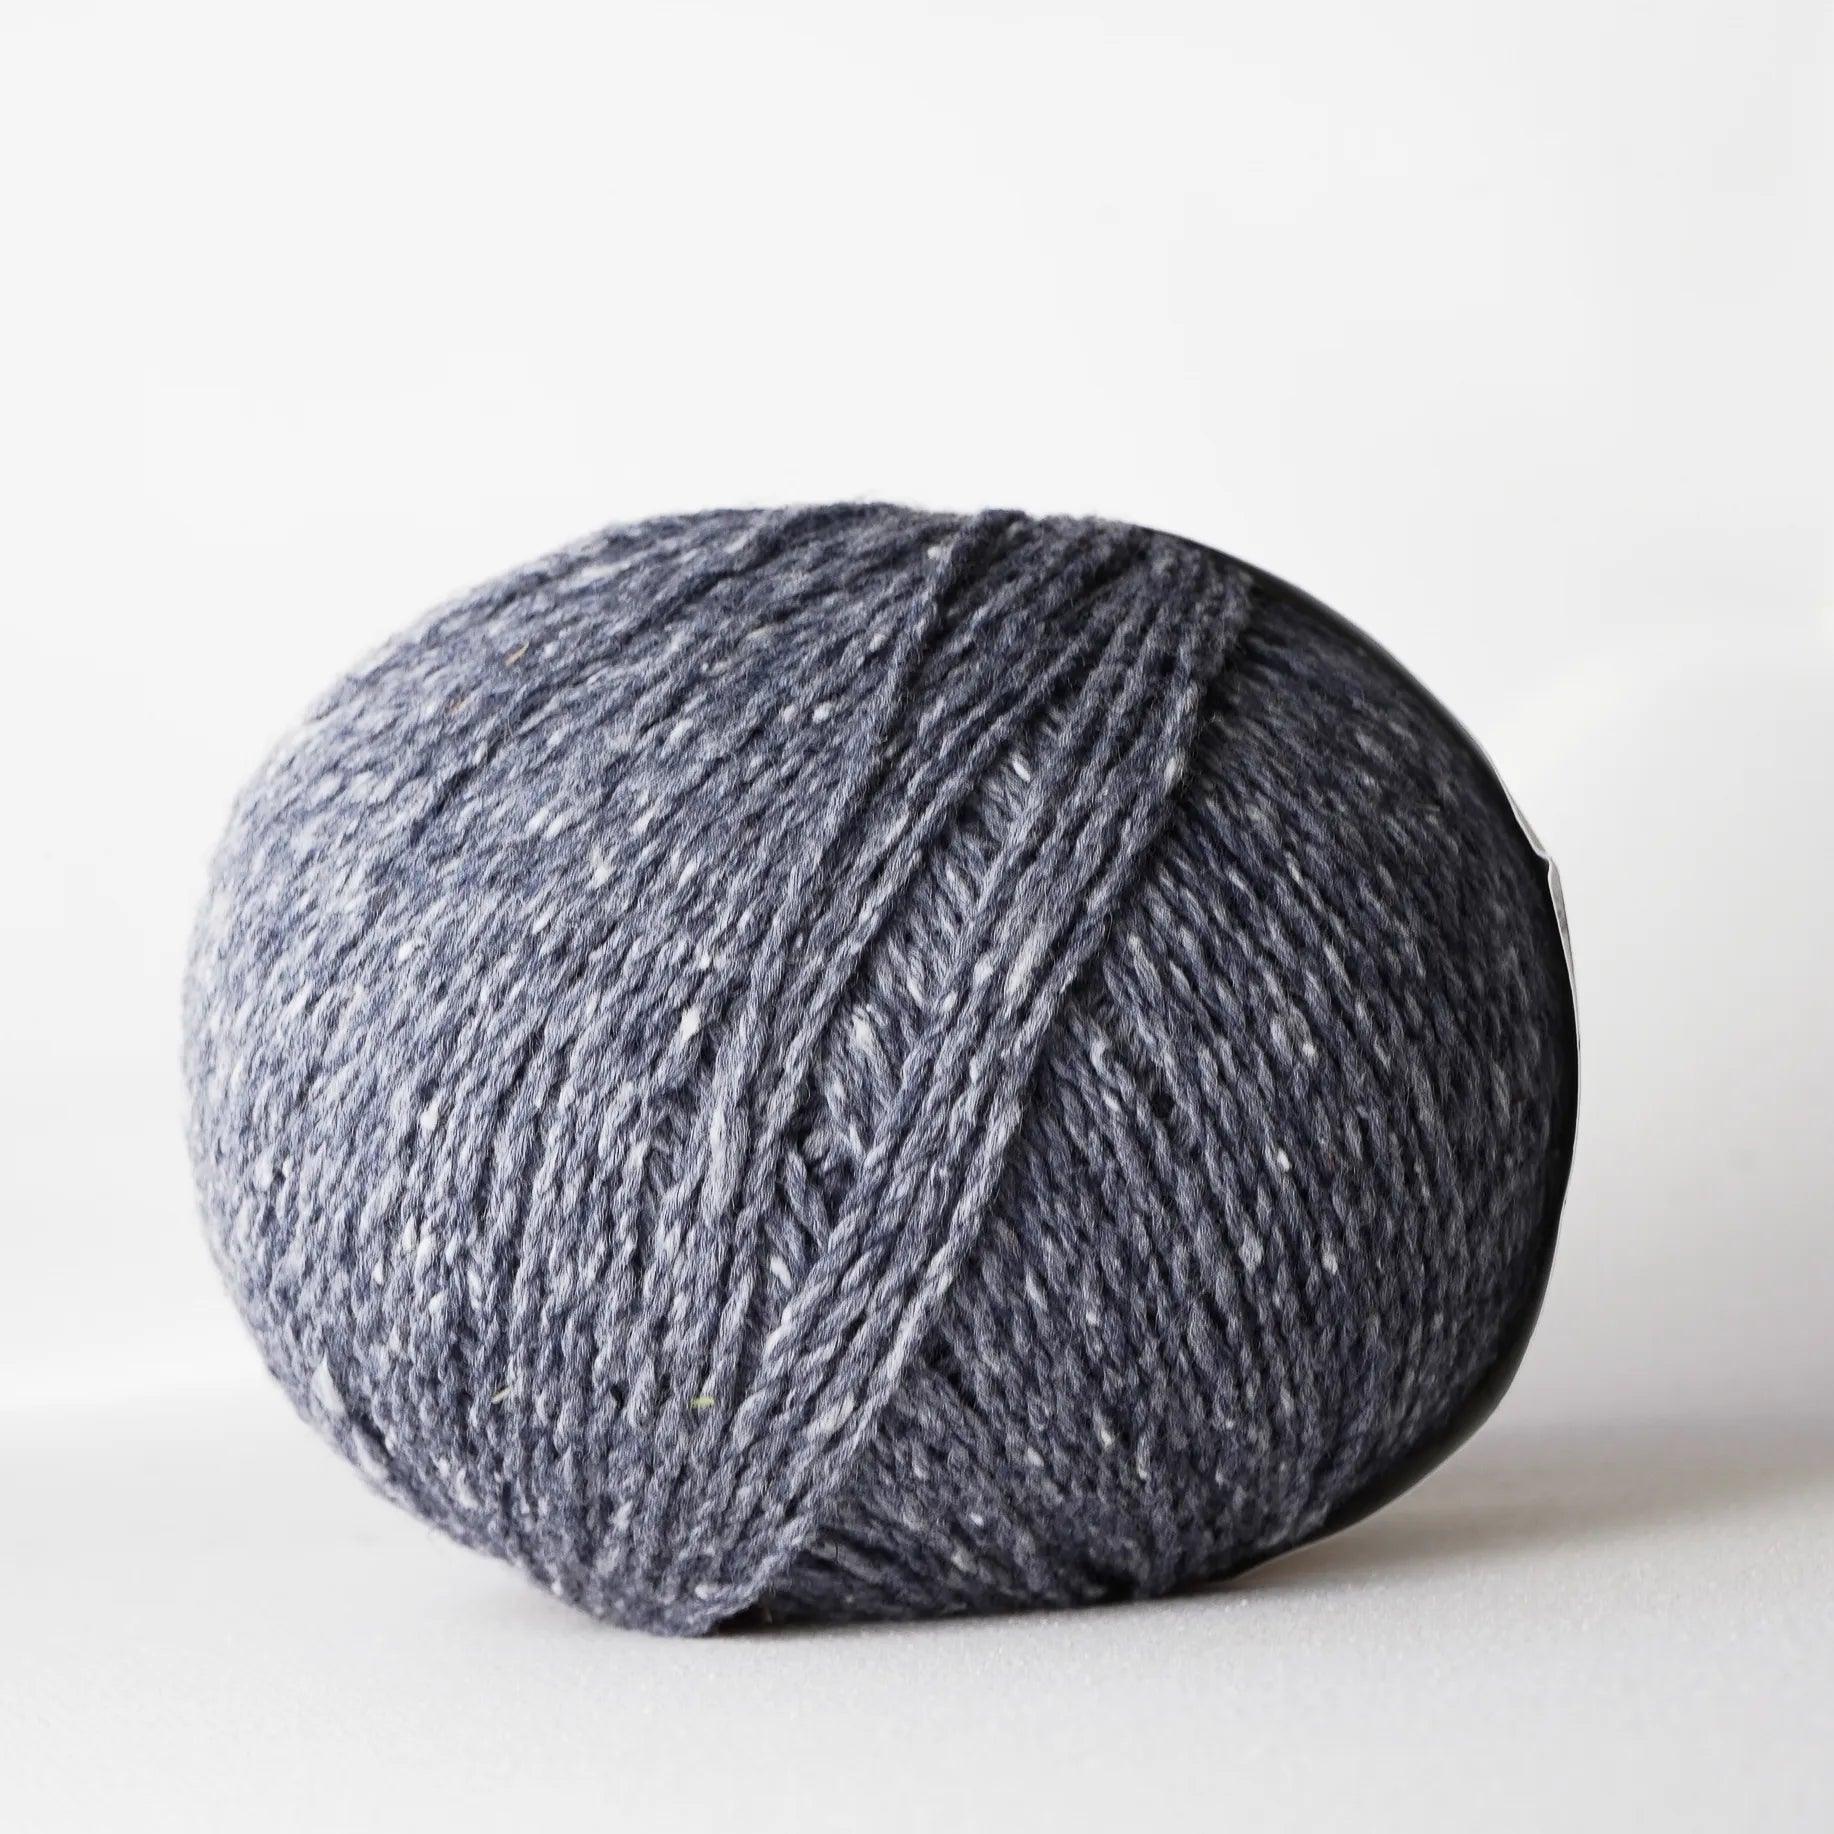 Saona - Cotton and Wool Fingering Weight Yarn - Aimee Sher Makes